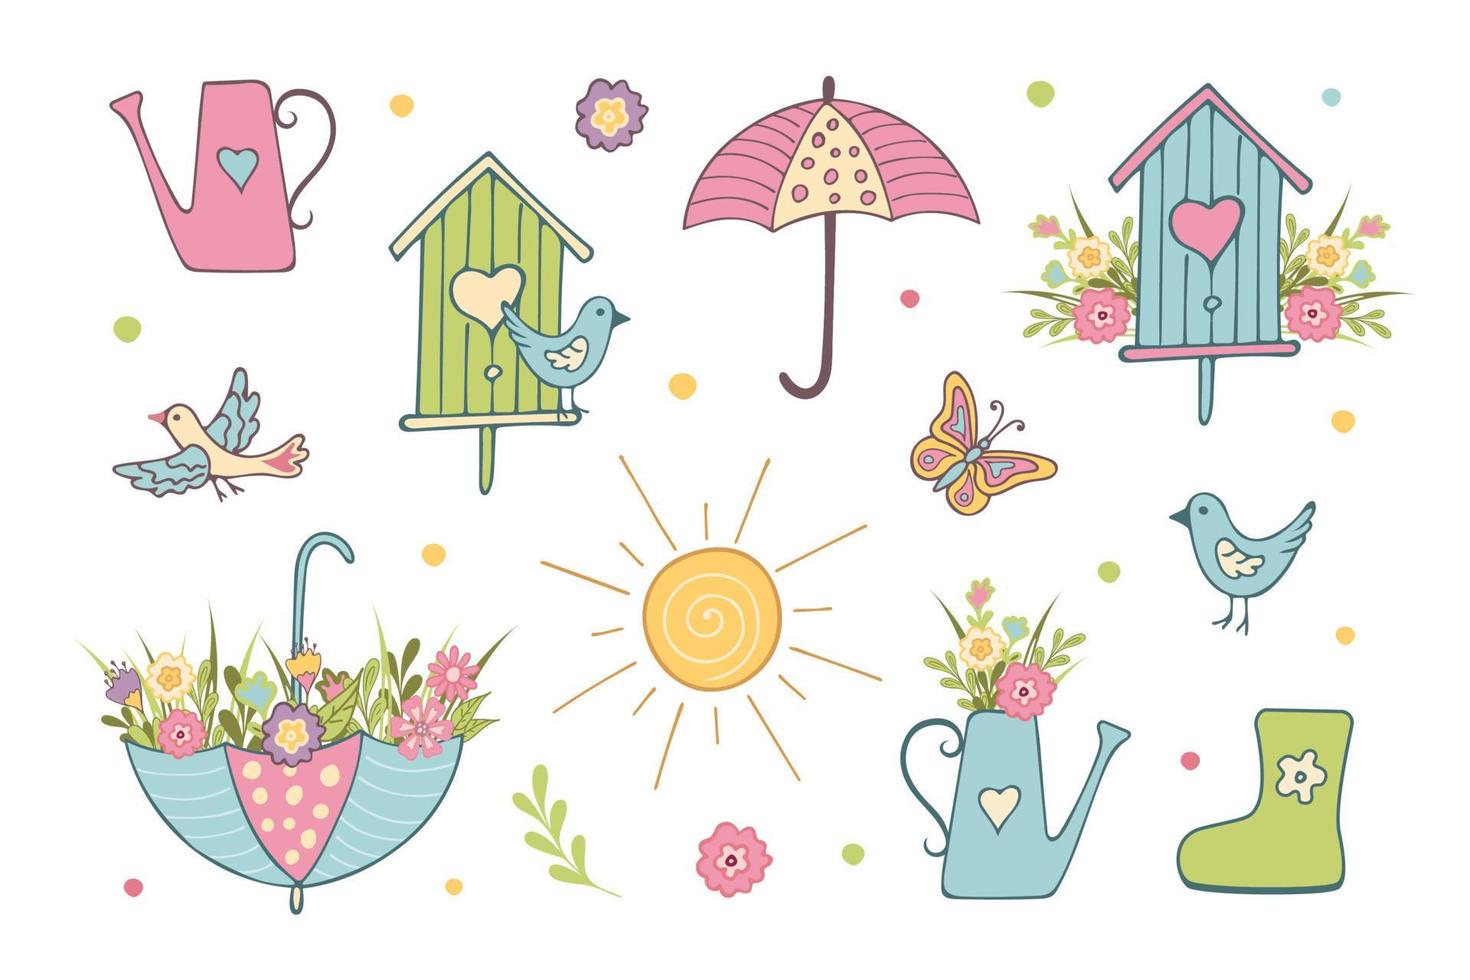 Set of Spring flat elements isolated on white background. Hand drawn vector illustration of bird, water can, birdhouse, umbrella, boot and flowers.